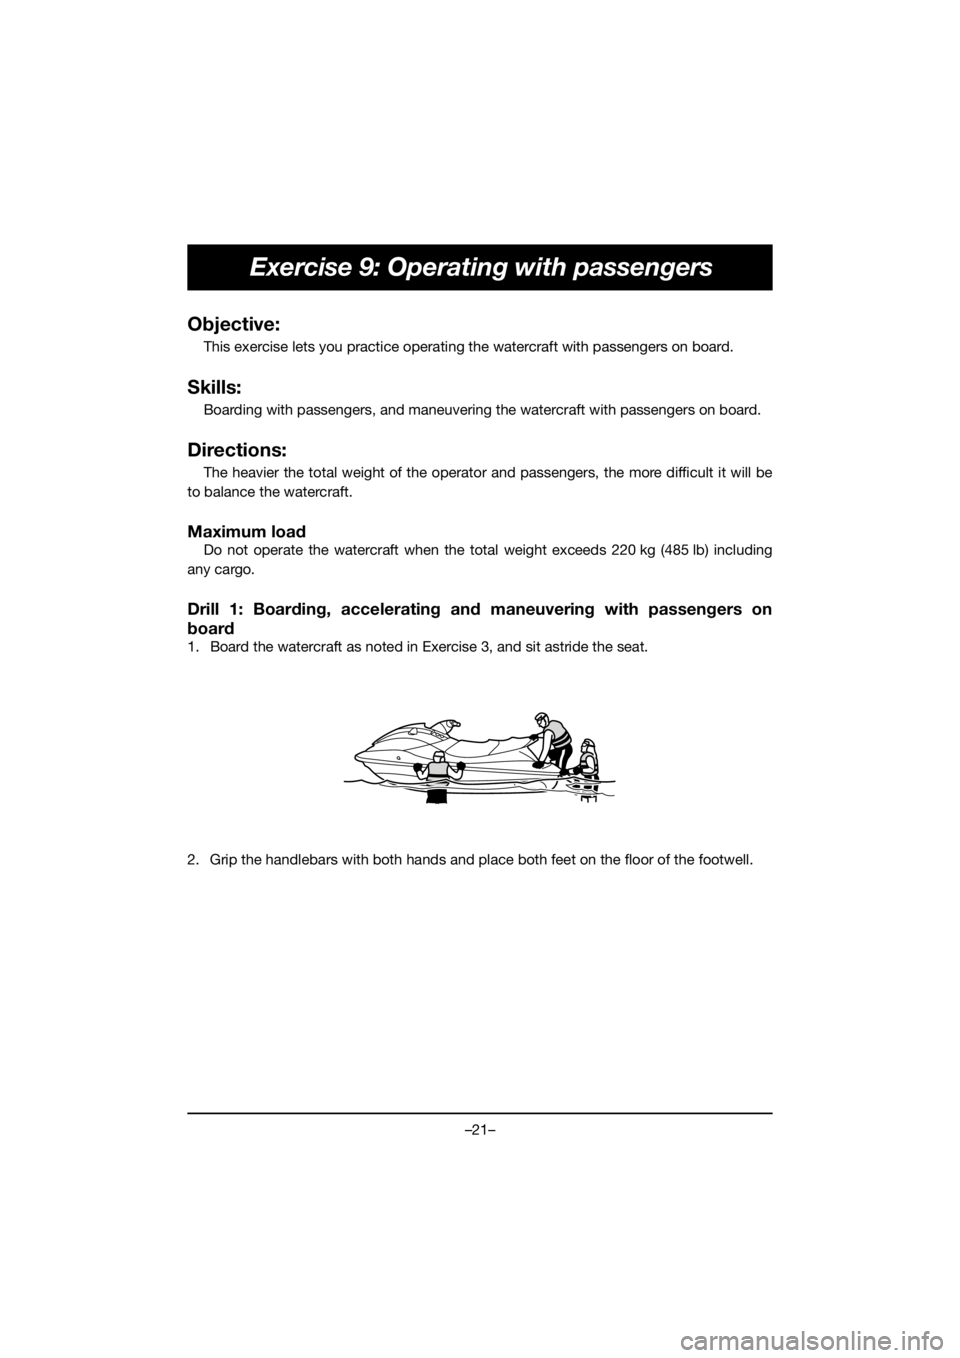 YAMAHA EXR 2020  Betriebsanleitungen (in German) –21–
Exercise 9: Operating with passengers
Objective:
This exercise lets you practice operating the watercraft with passengers on board.
Skills:
Boarding with passengers, and maneuvering the water